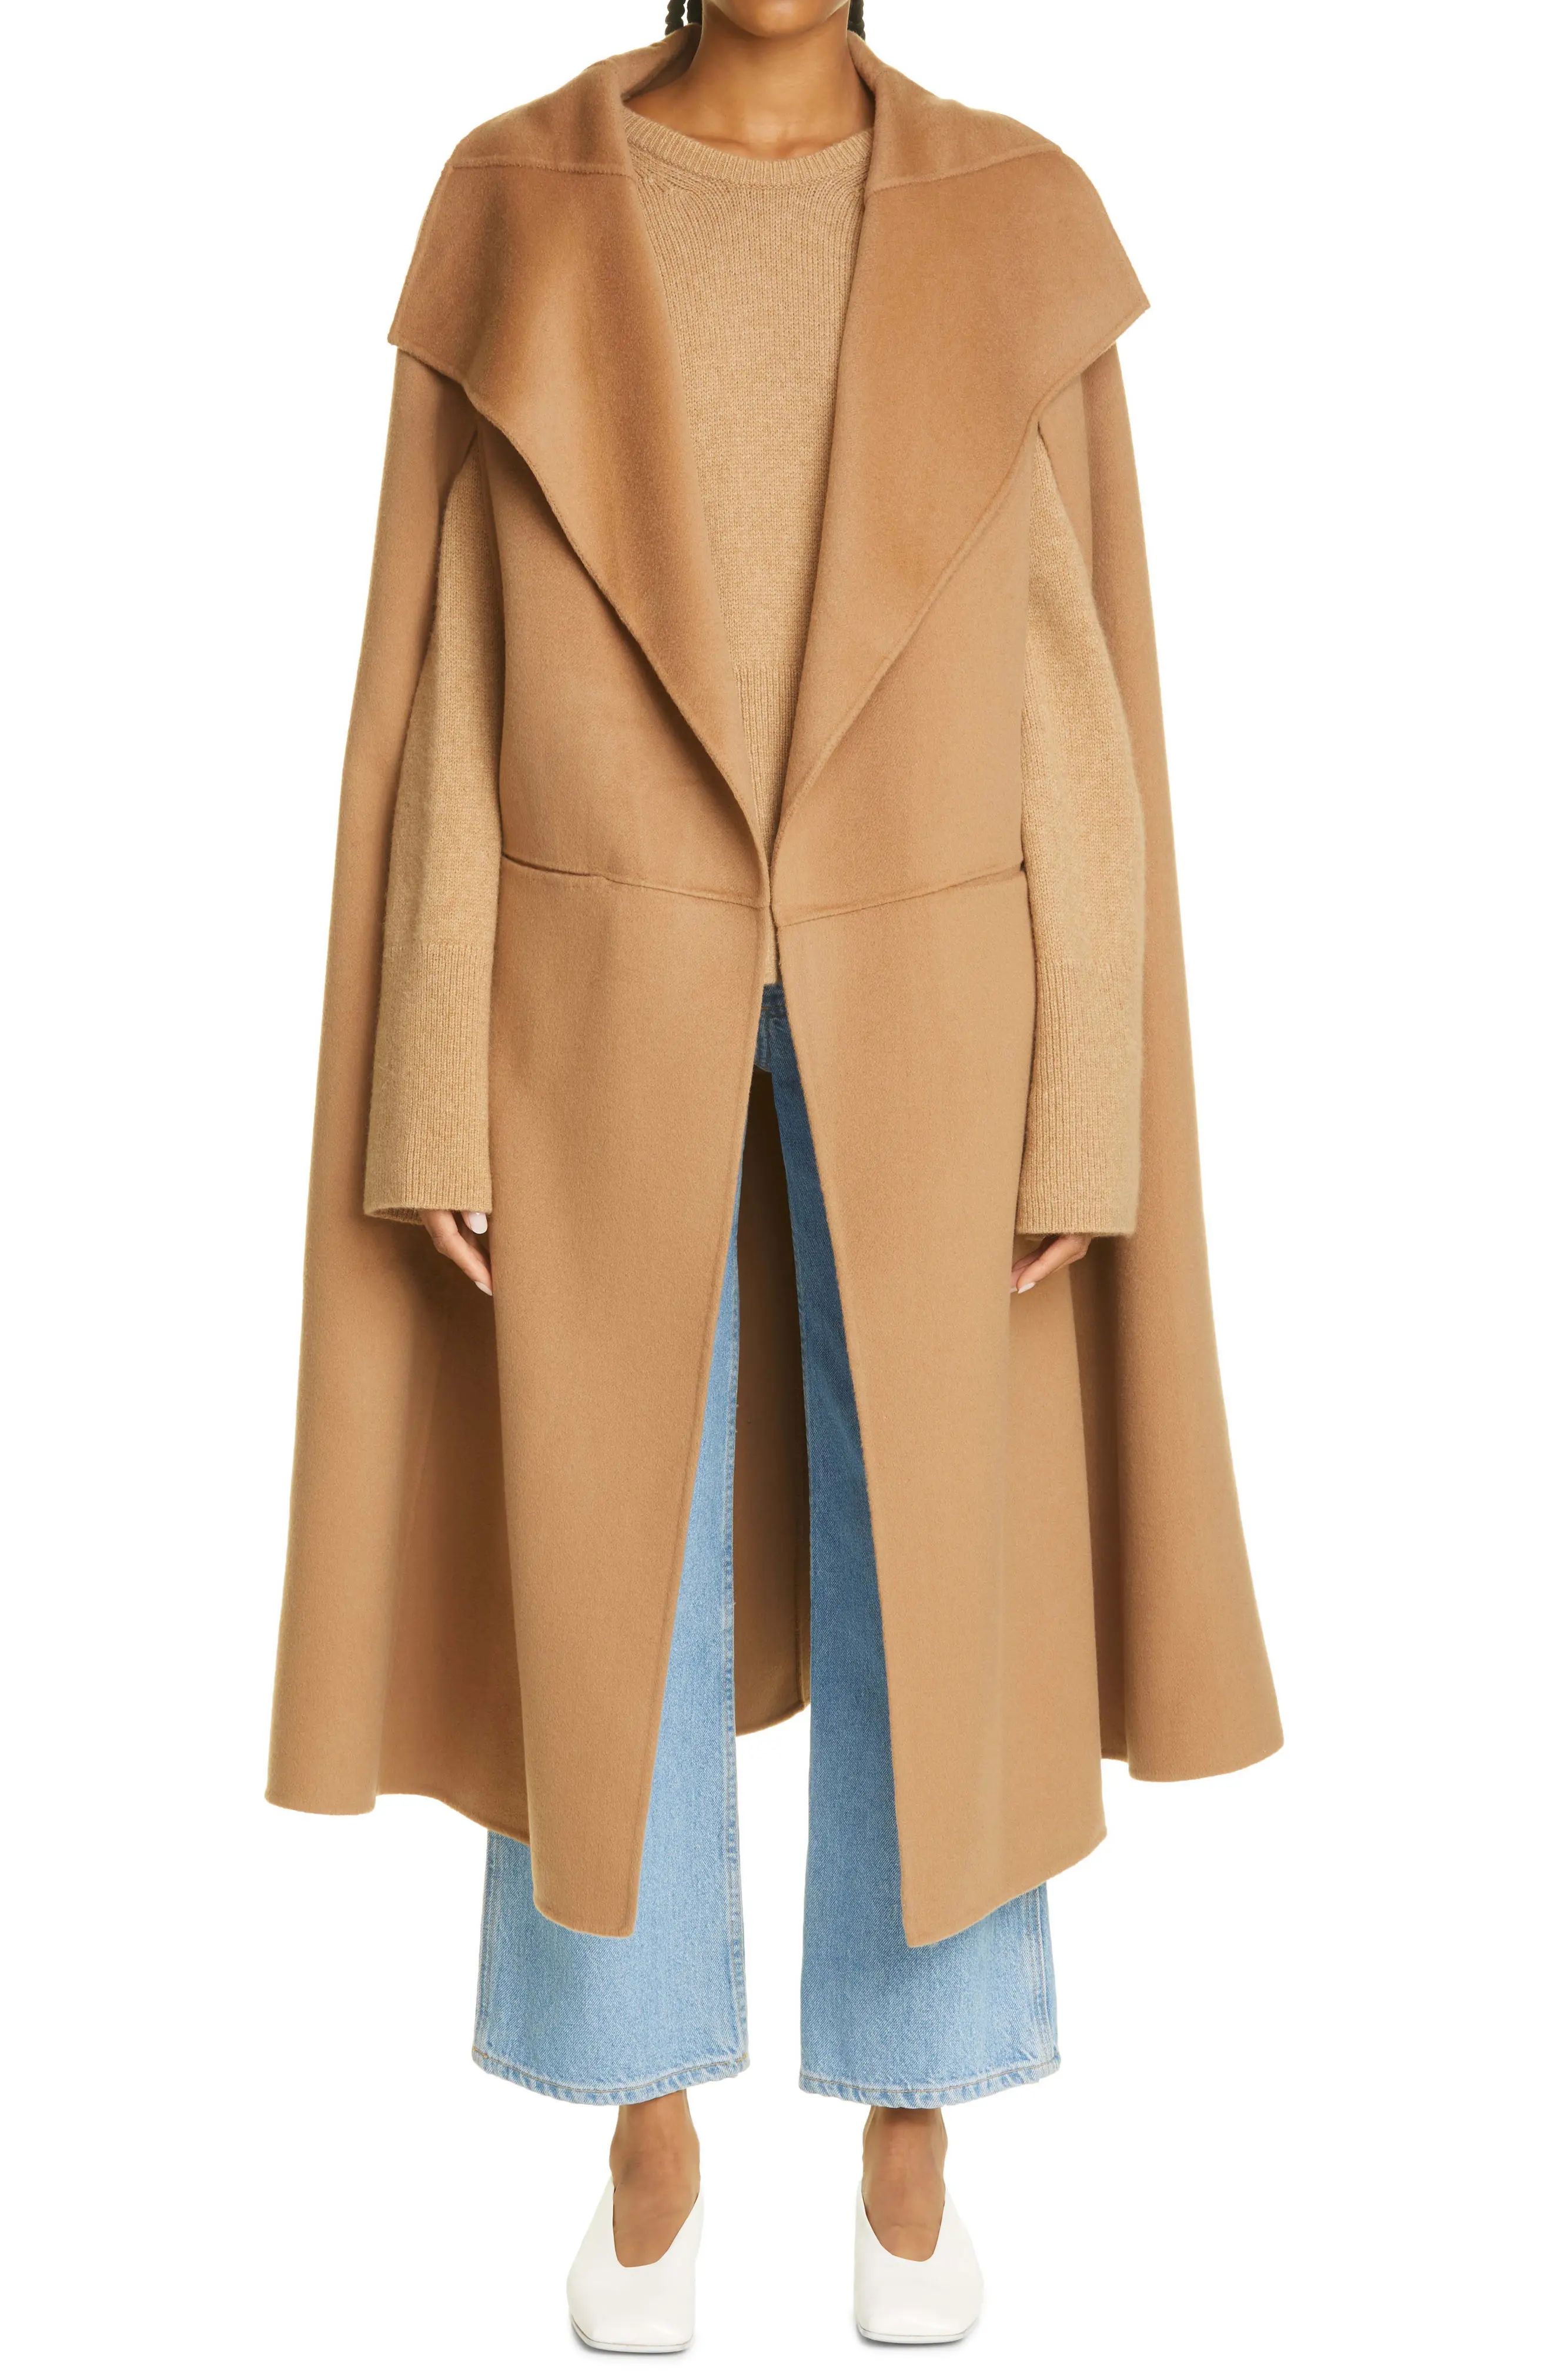 Toteme Women's Wool & Cashmere Cape, Size X-Small in Camel at Nordstrom | Nordstrom